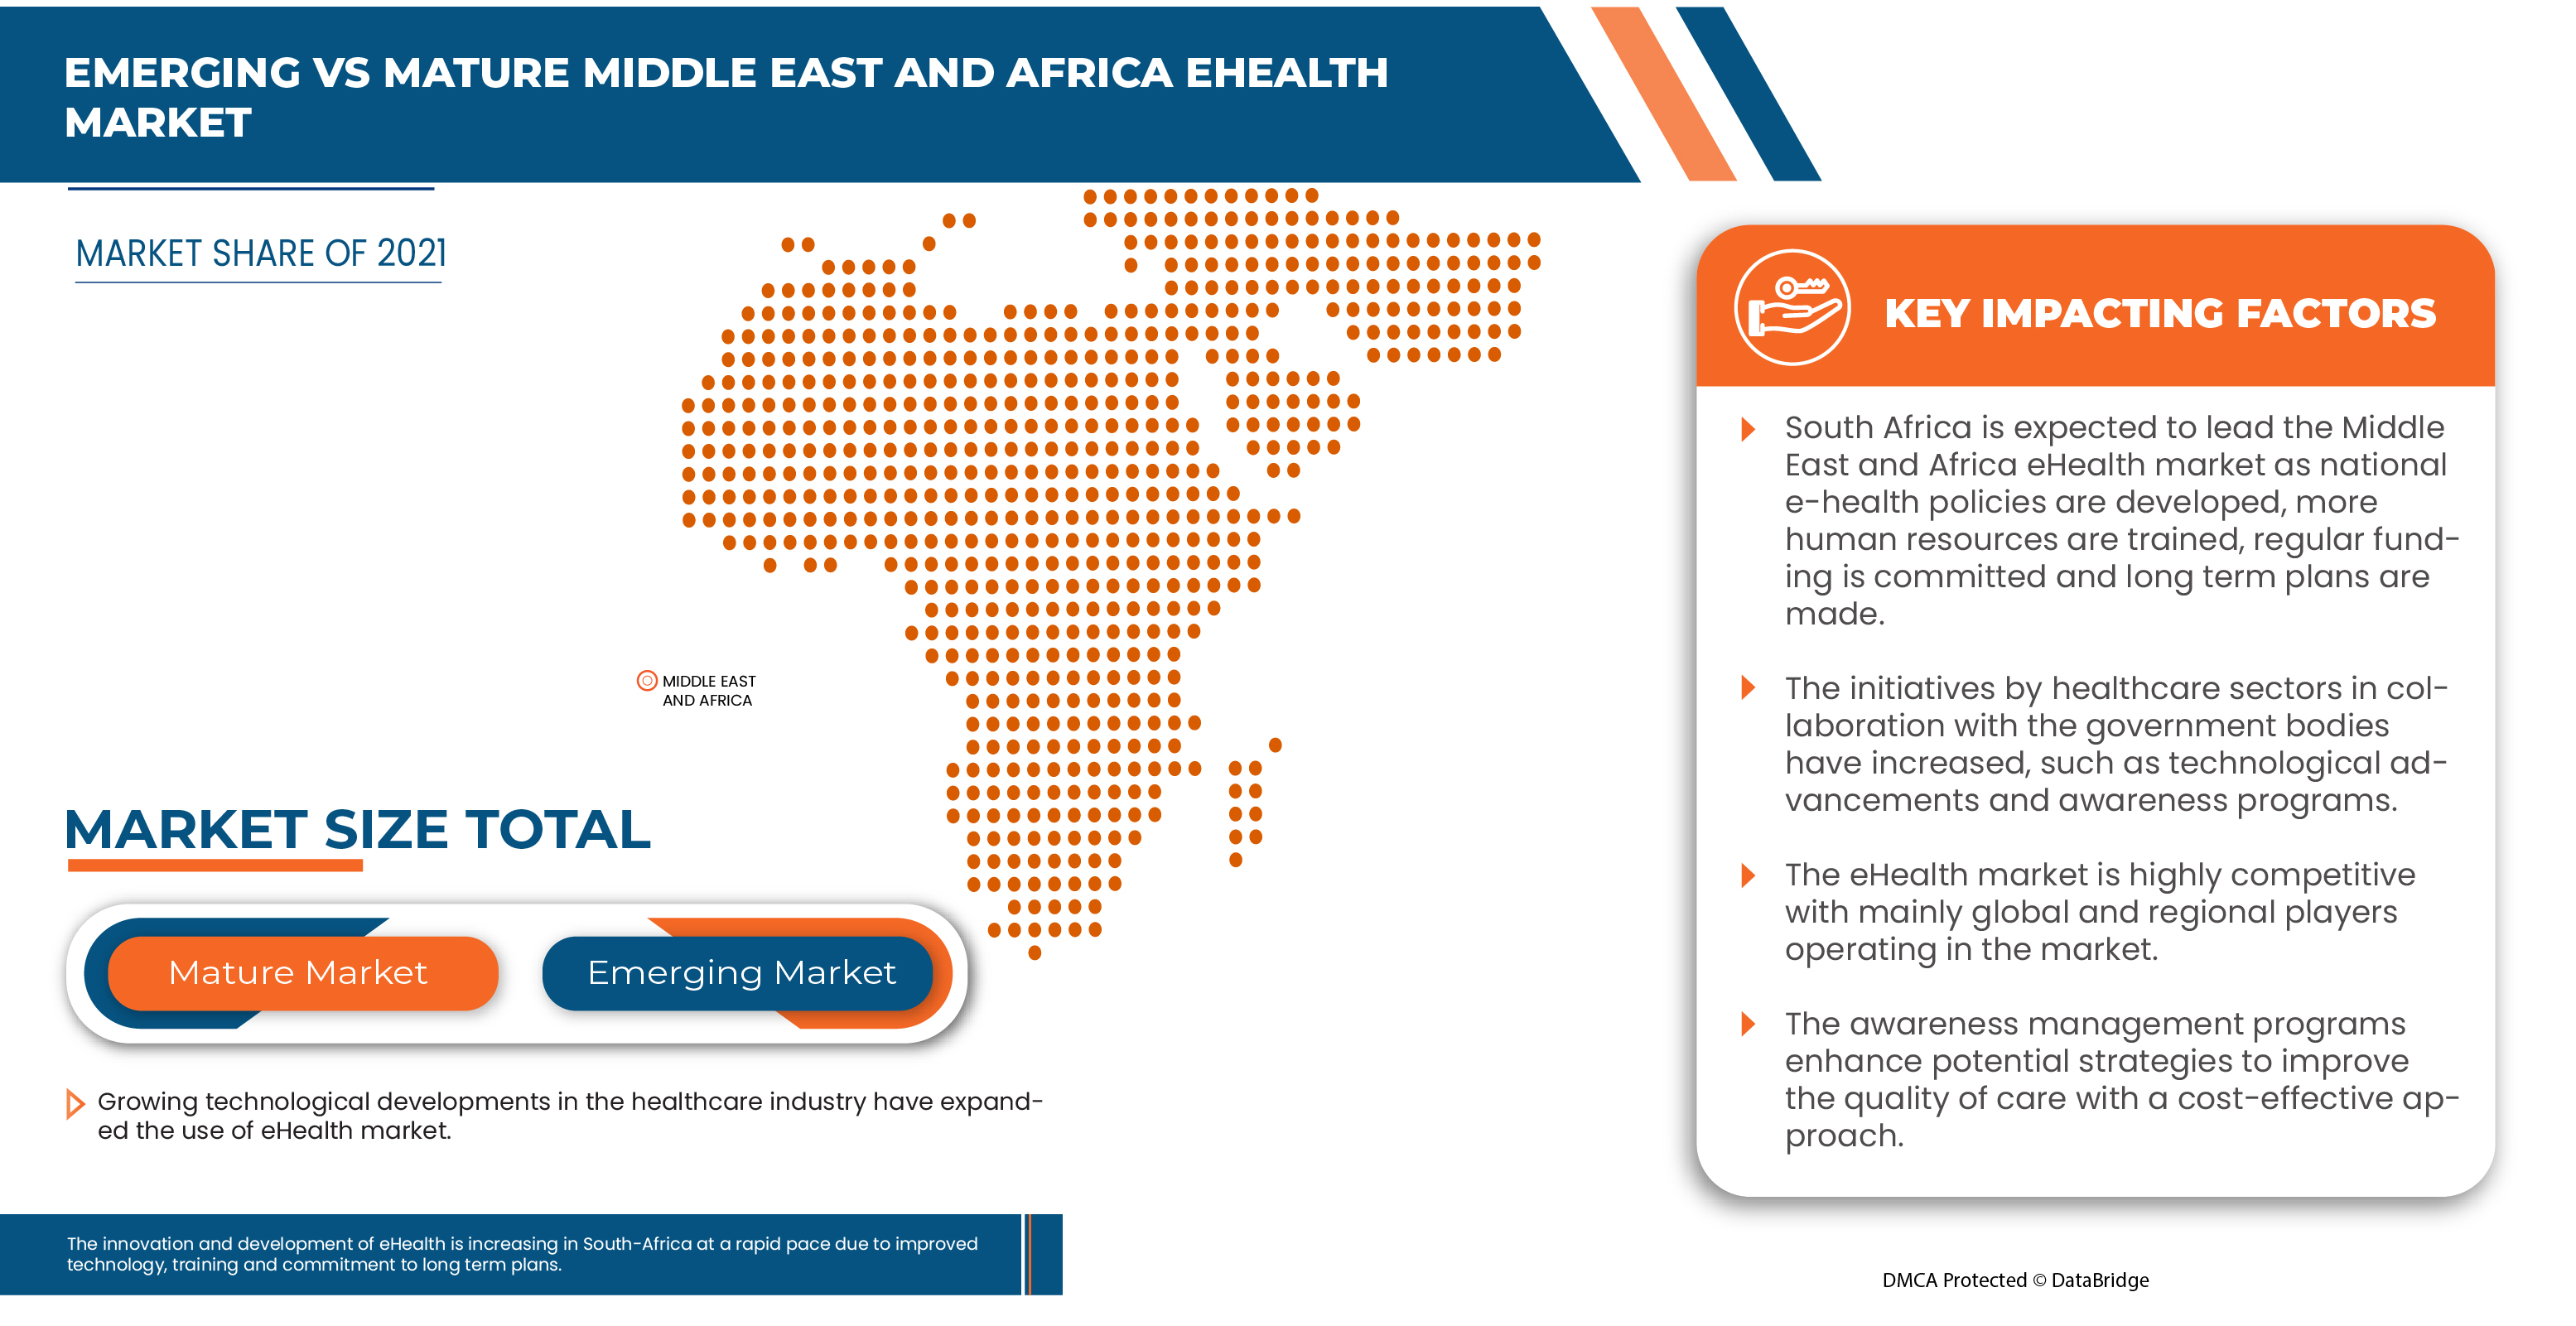 Middle East and Africa eHealth Market